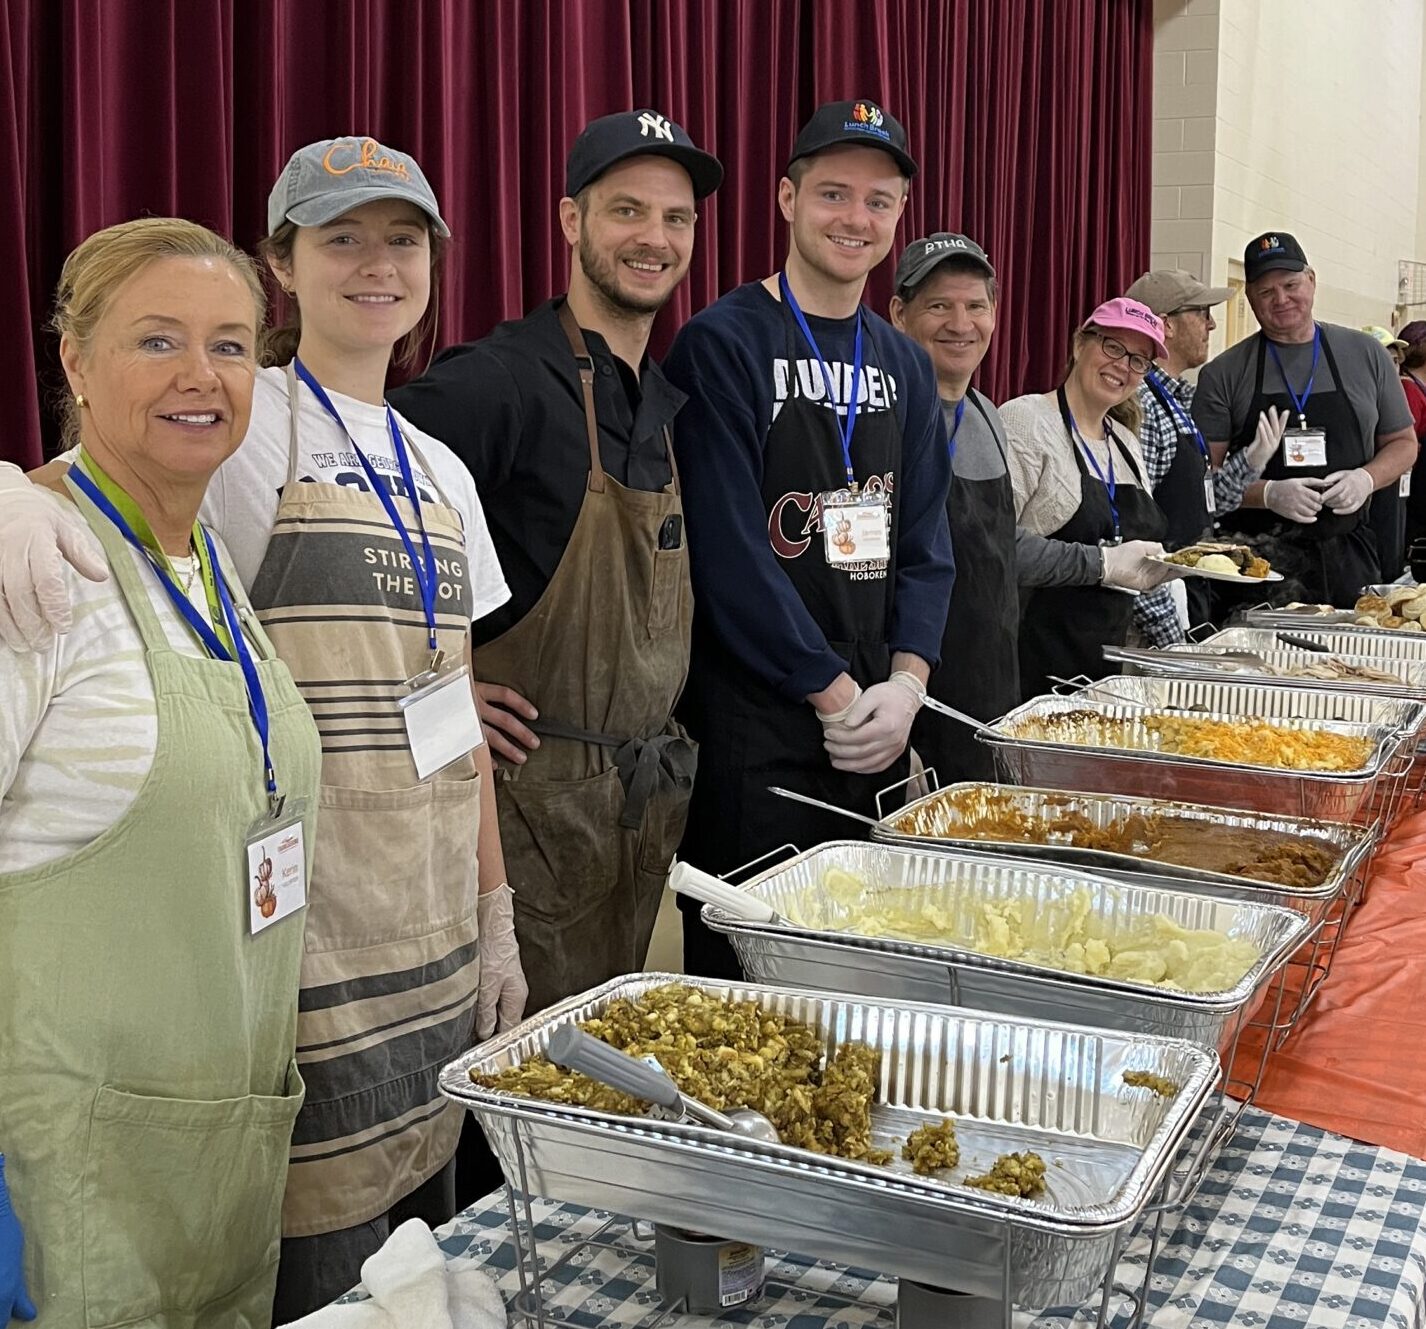 Group of volunteers serving food from the buffet